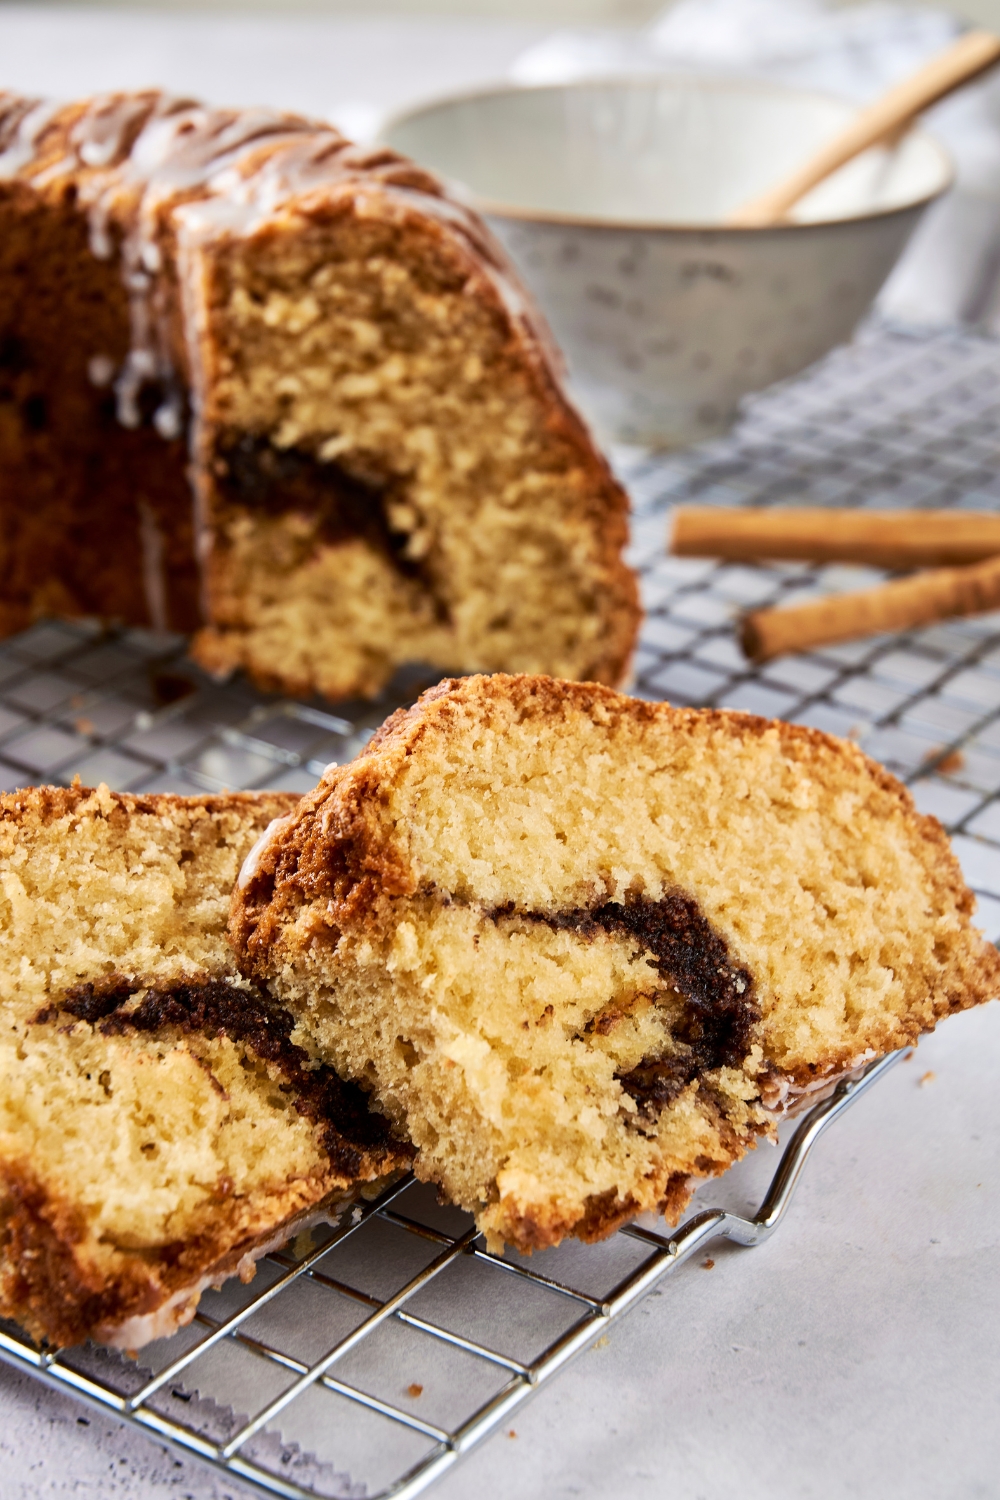 Two slices of cinnamon bundt cake glazed with icing.